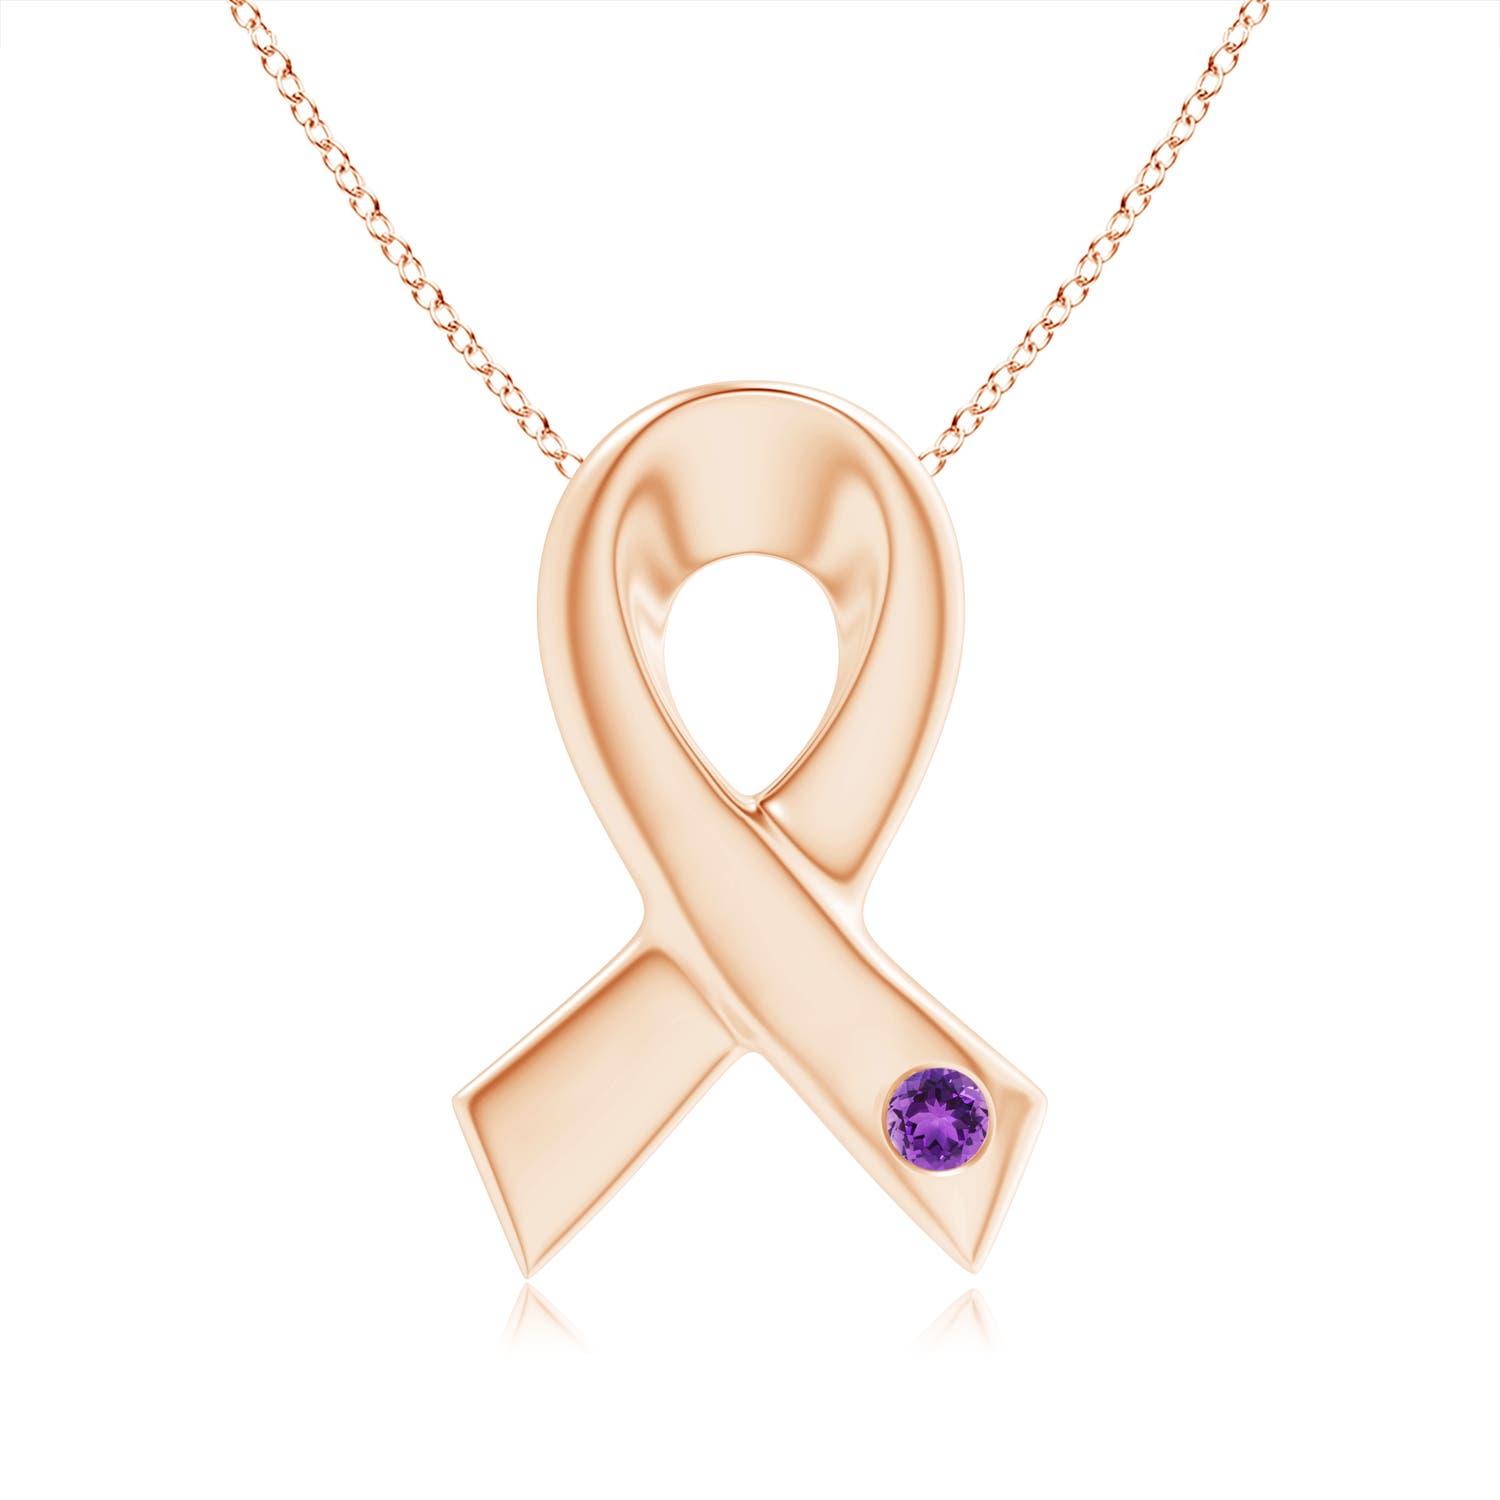 AAA - Amethyst / 0.06 CT / 14 KT Rose Gold